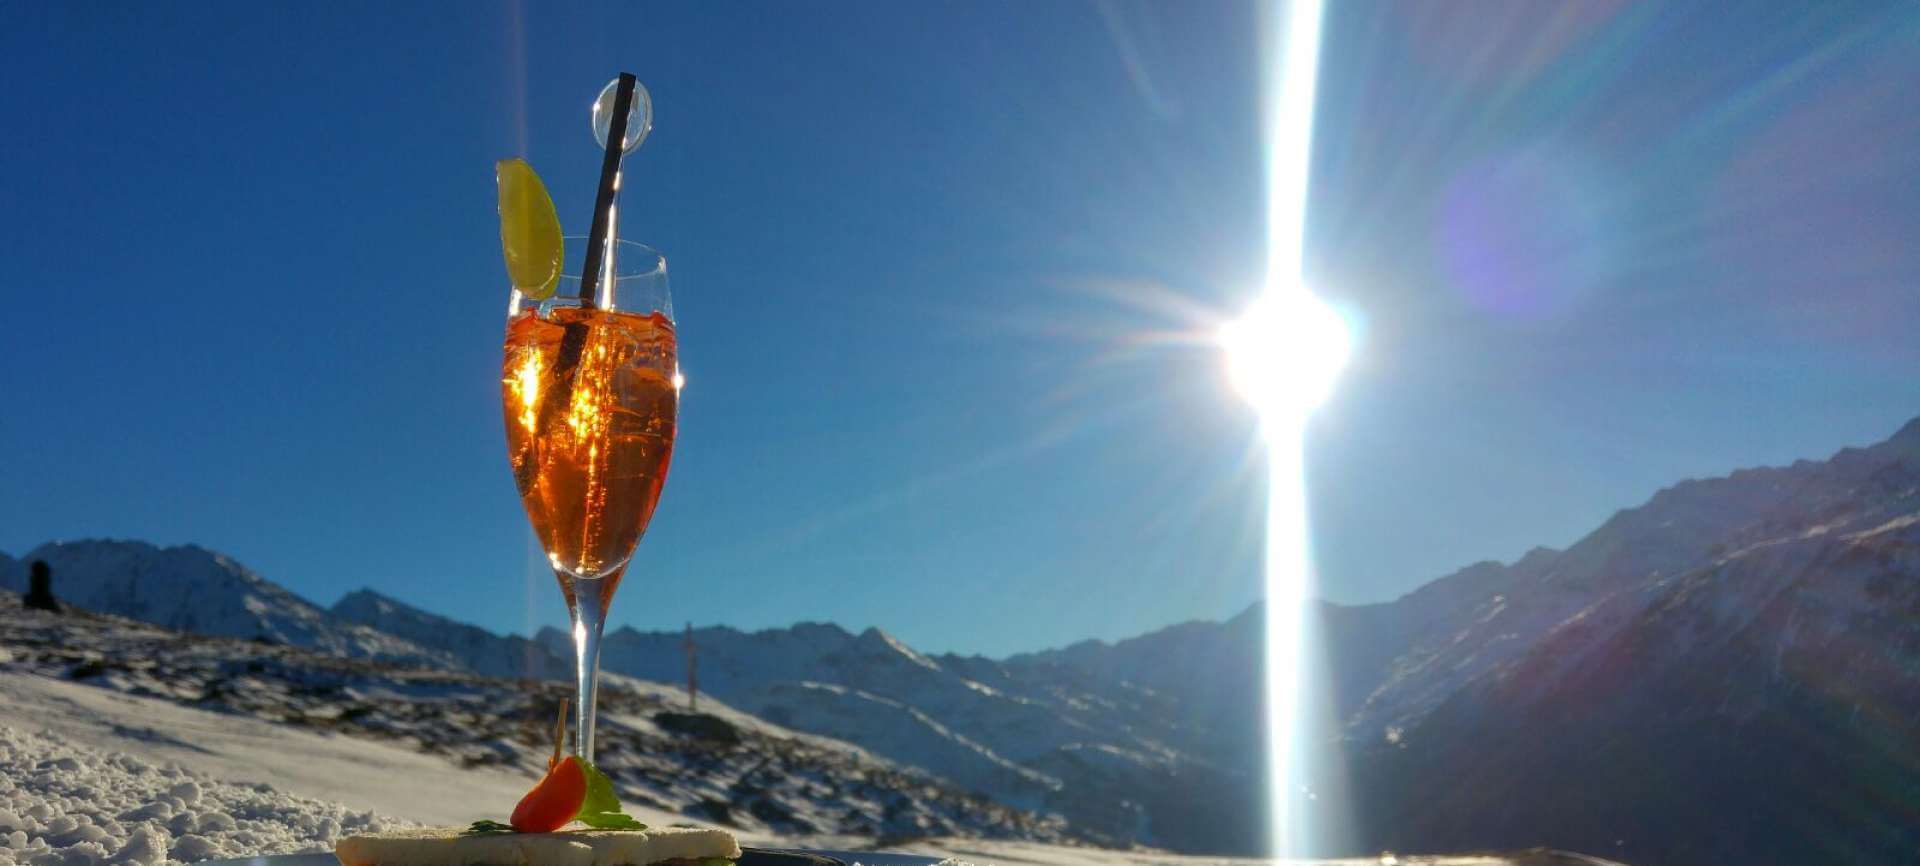 Sun, snow and the deep blue sky - these are the most important ingredients of a perfect skiing day.